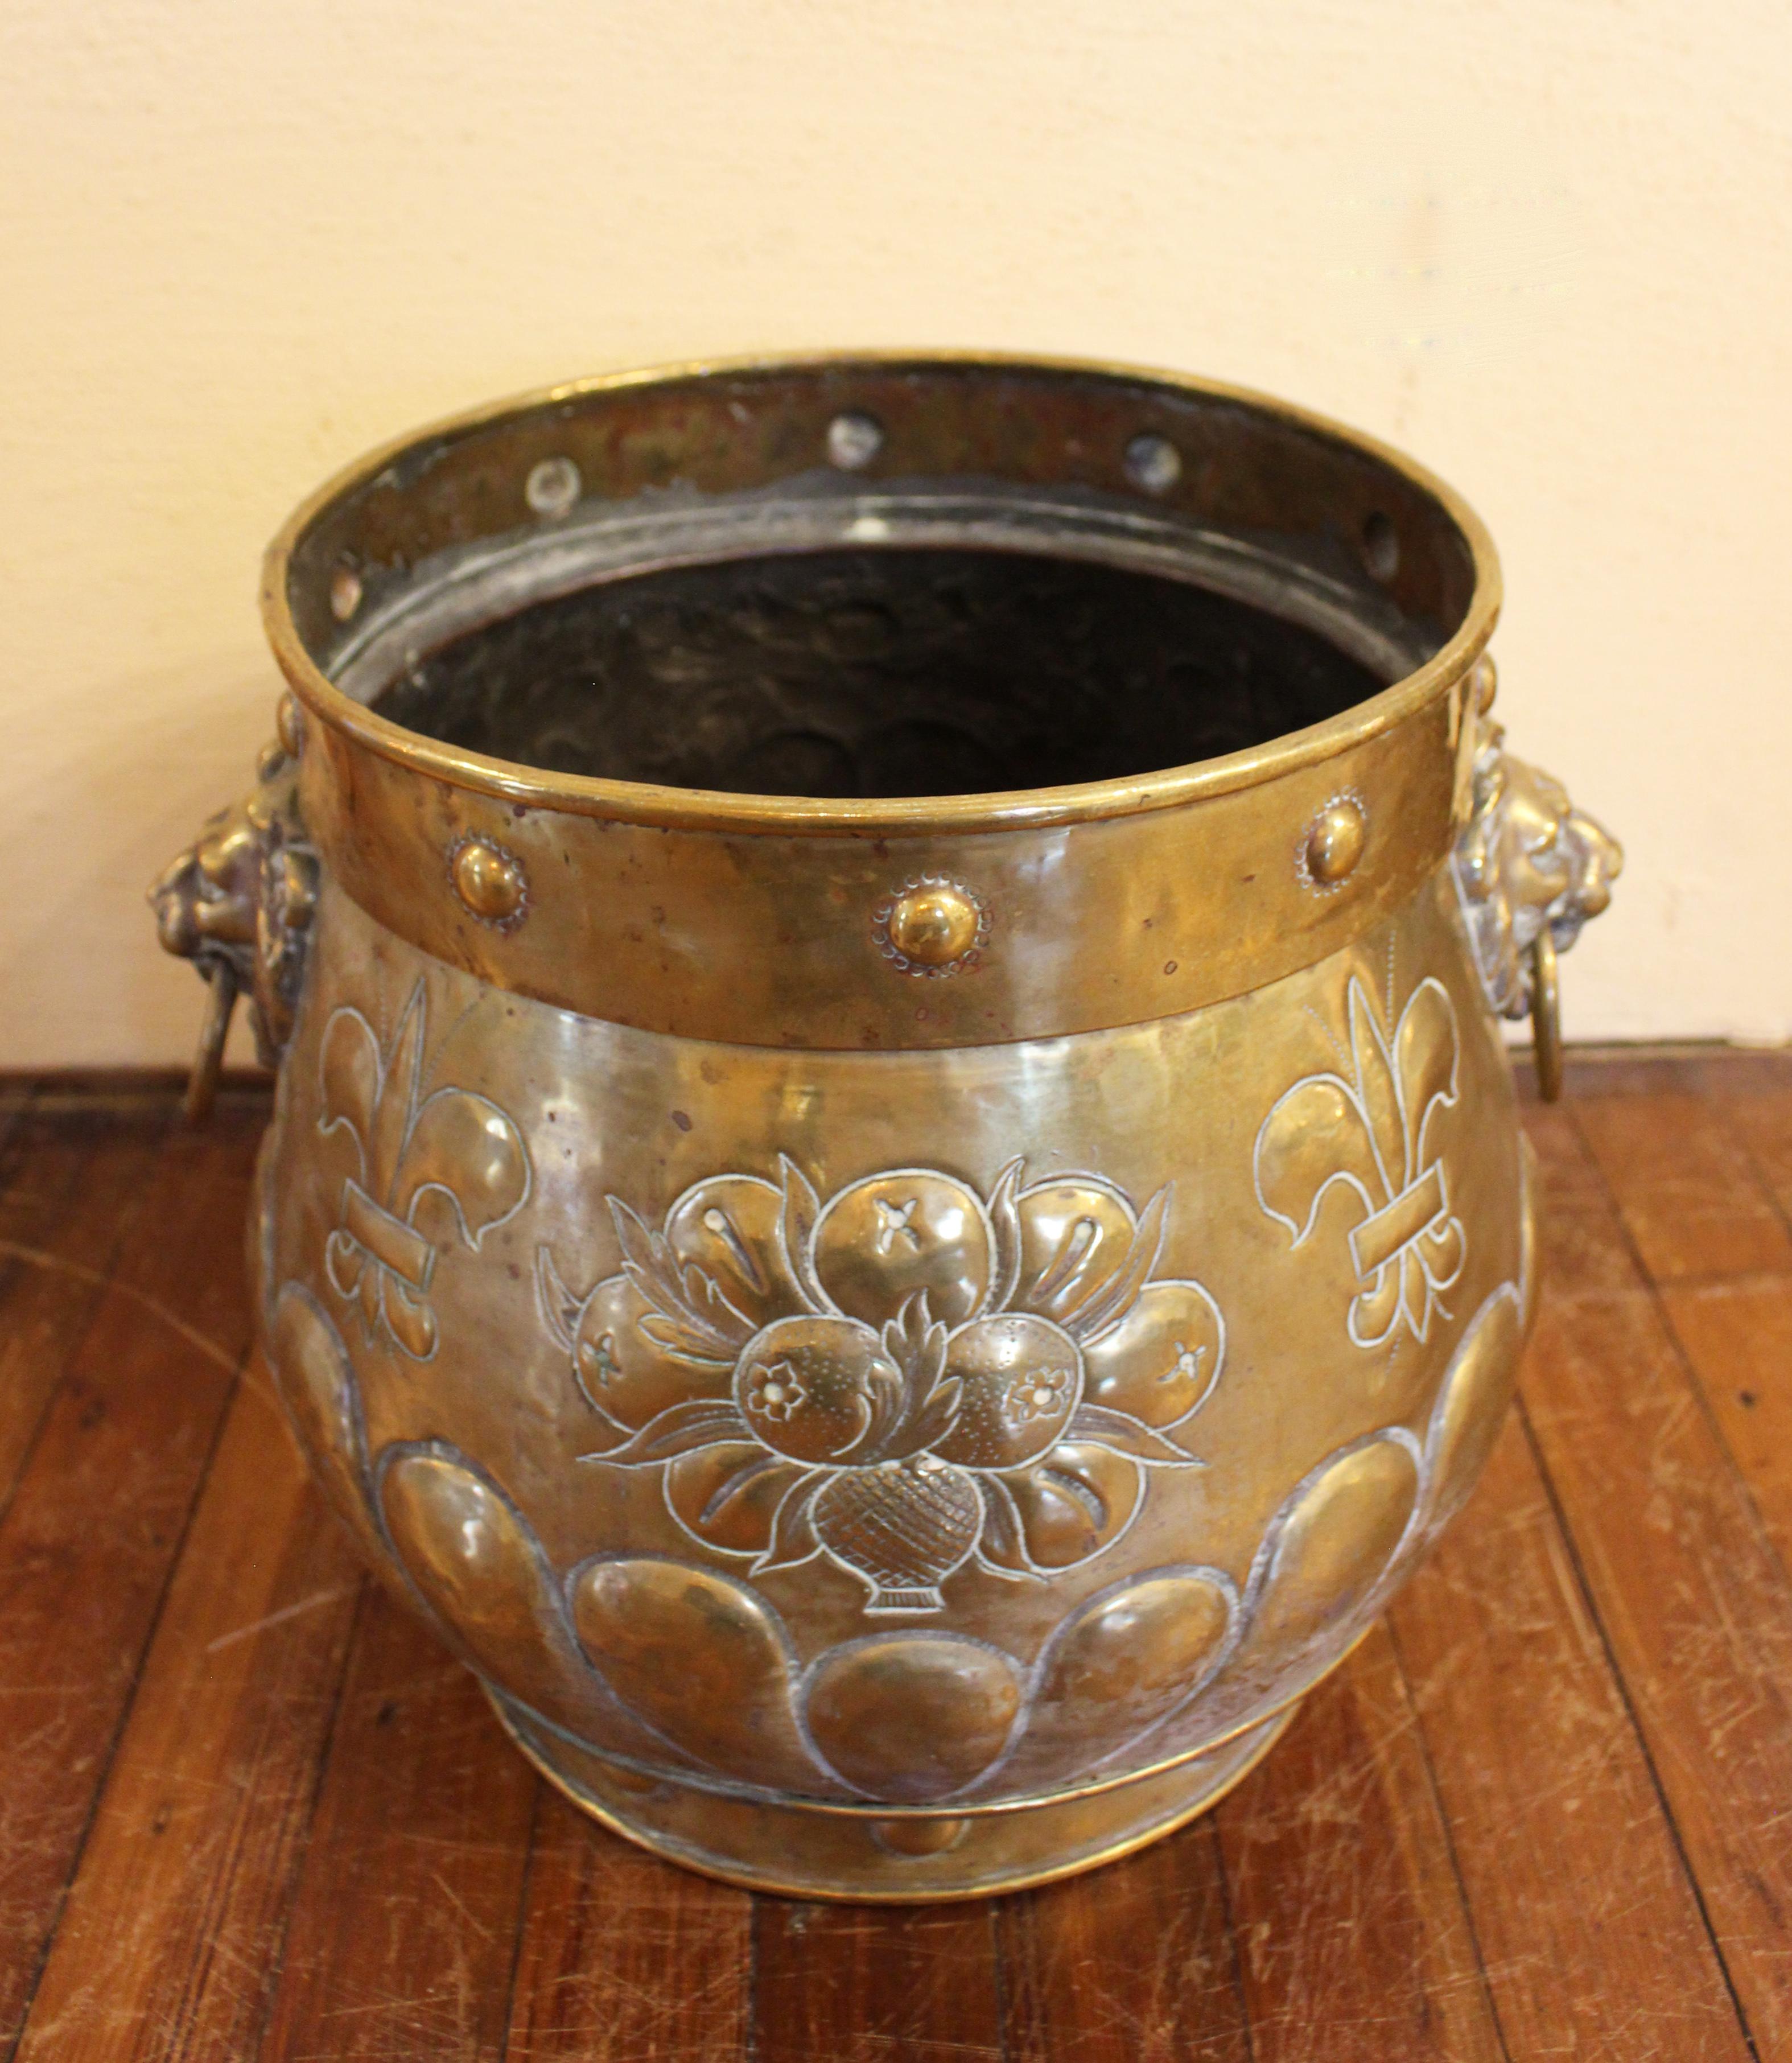 Late Victorian Late 19th Century English Brass Coal Hod or Jardiniere with Lion Ring Handles